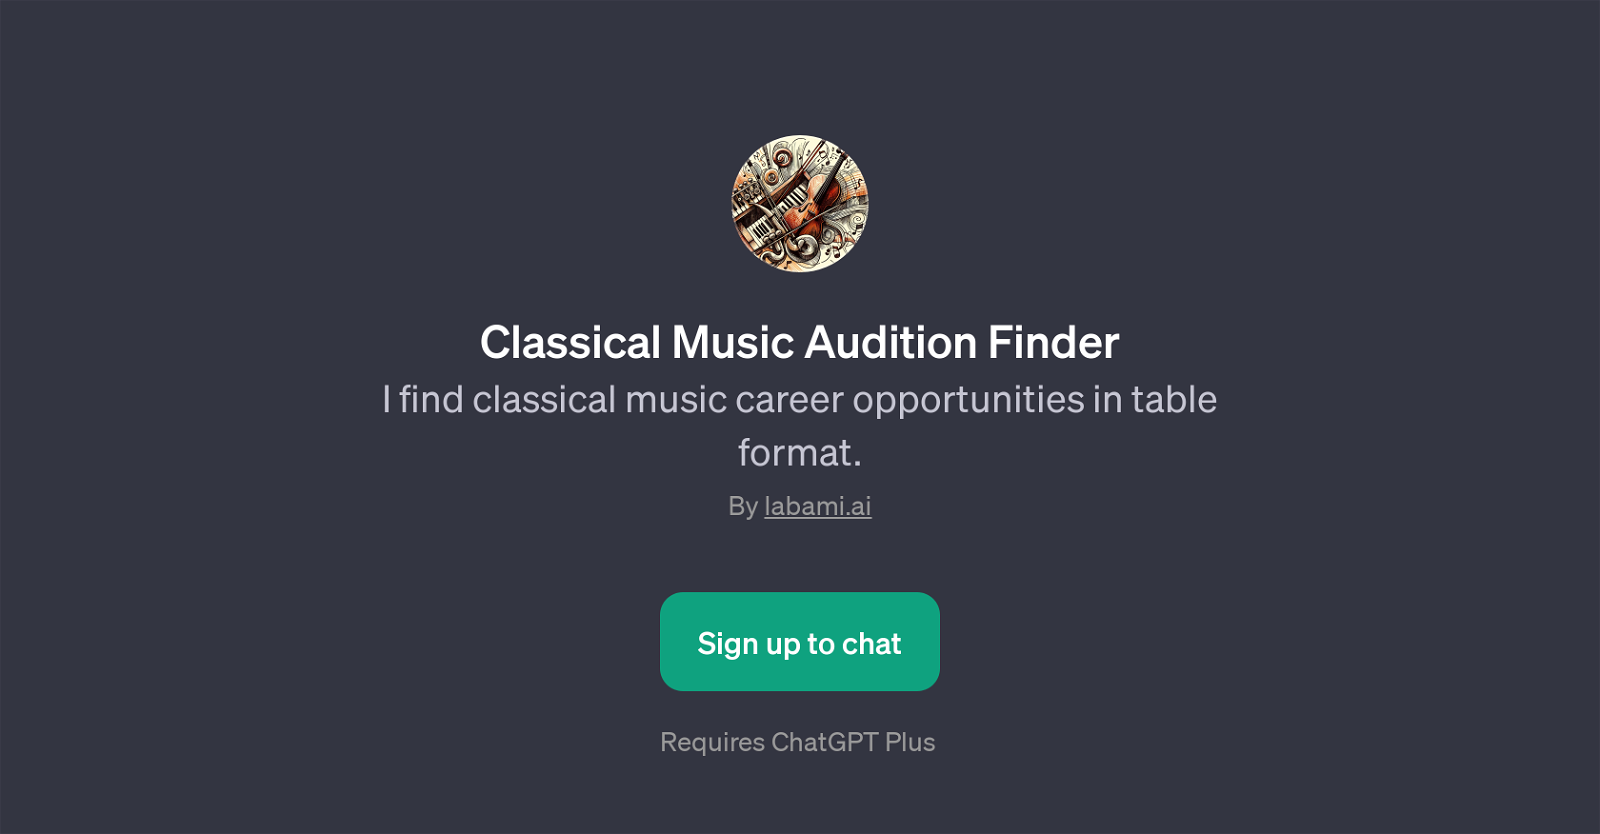 Classical Music Audition Finder website